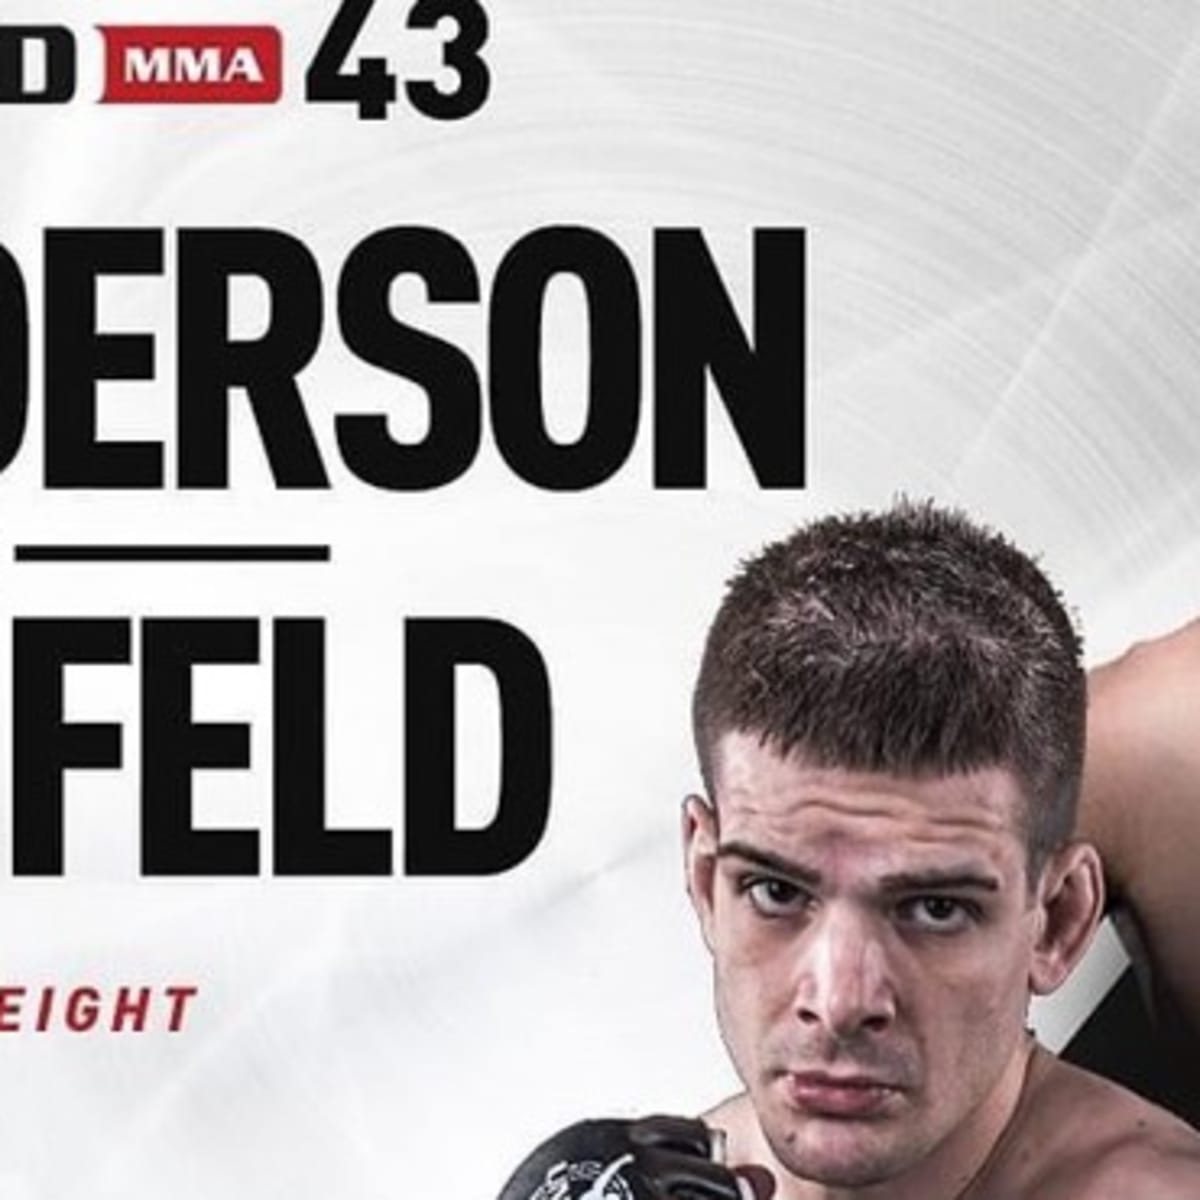 Lucas Neufeld looking to finish Neal Anderson at Unified MMA 43